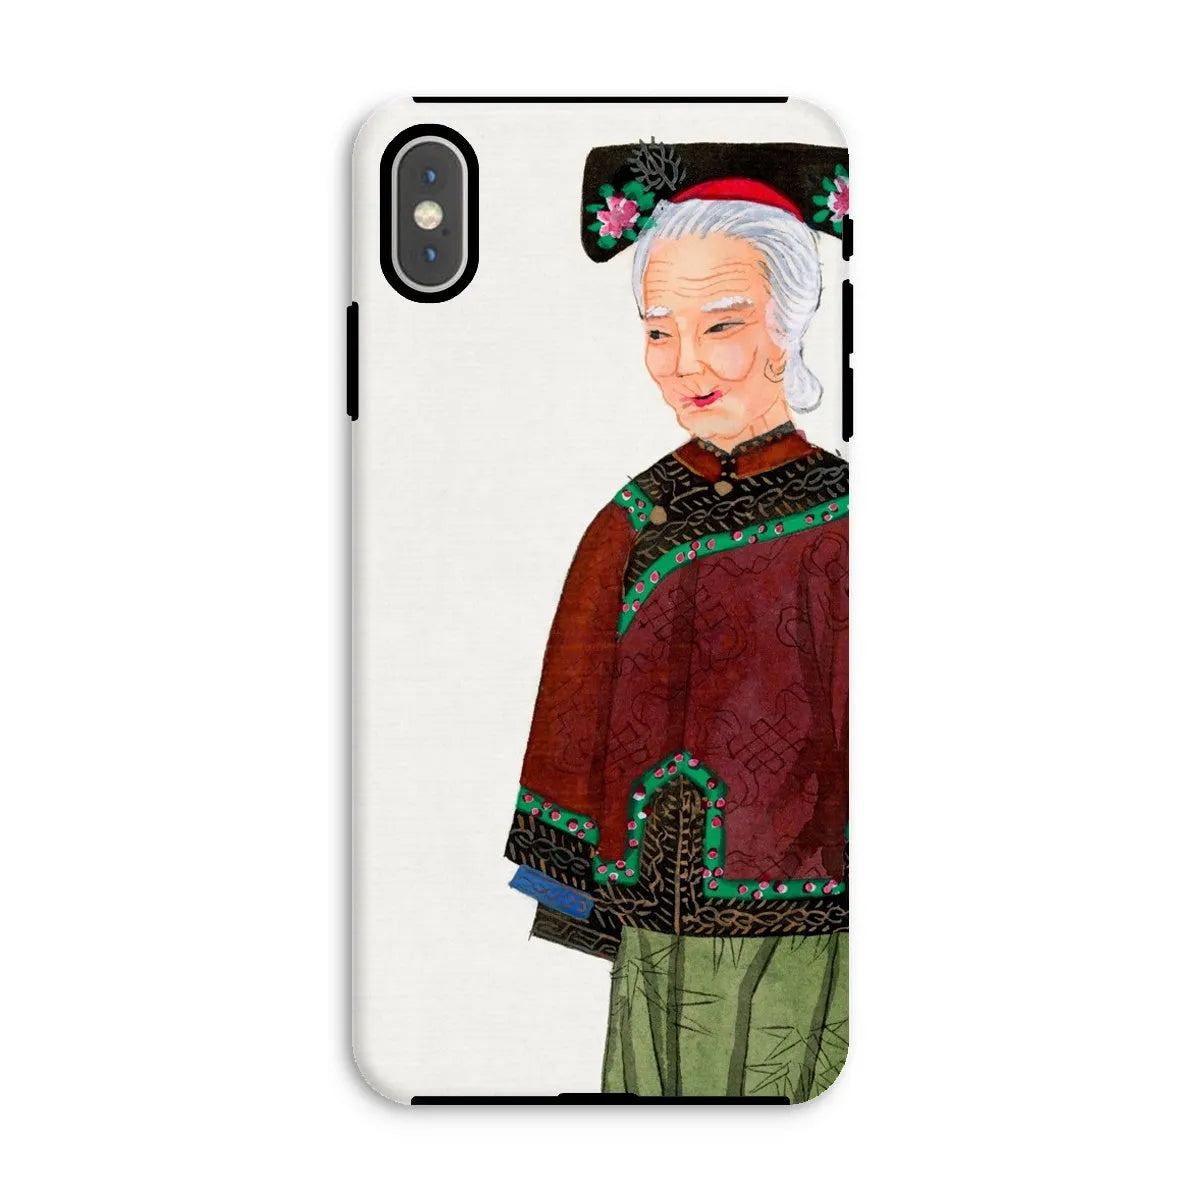 Grand Dame Too - Aesthetic Chinese Art Phone Case - Iphone Xs Max / Matte - Mobile Phone Cases - Aesthetic Art